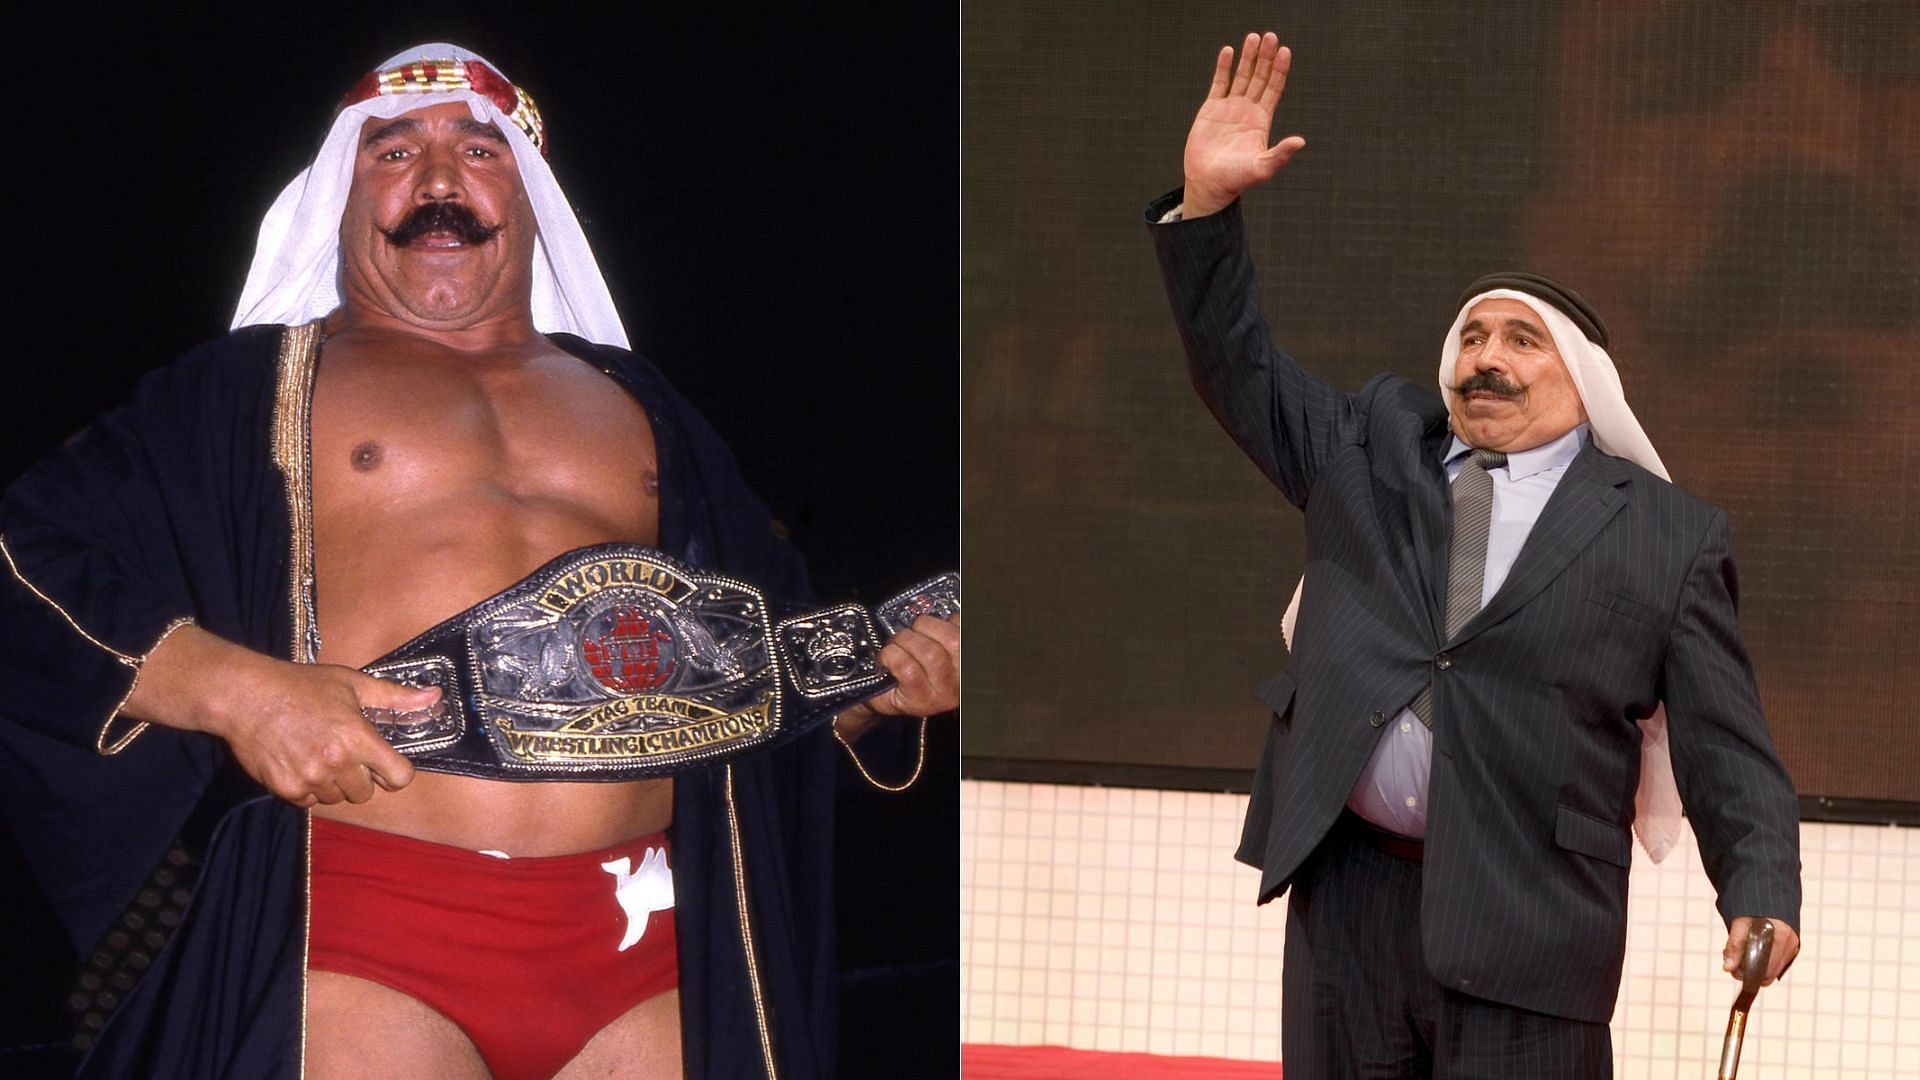 Sgt. Slaughter inducted The Iron Sheik into the WWE Hall of Fame in 2005